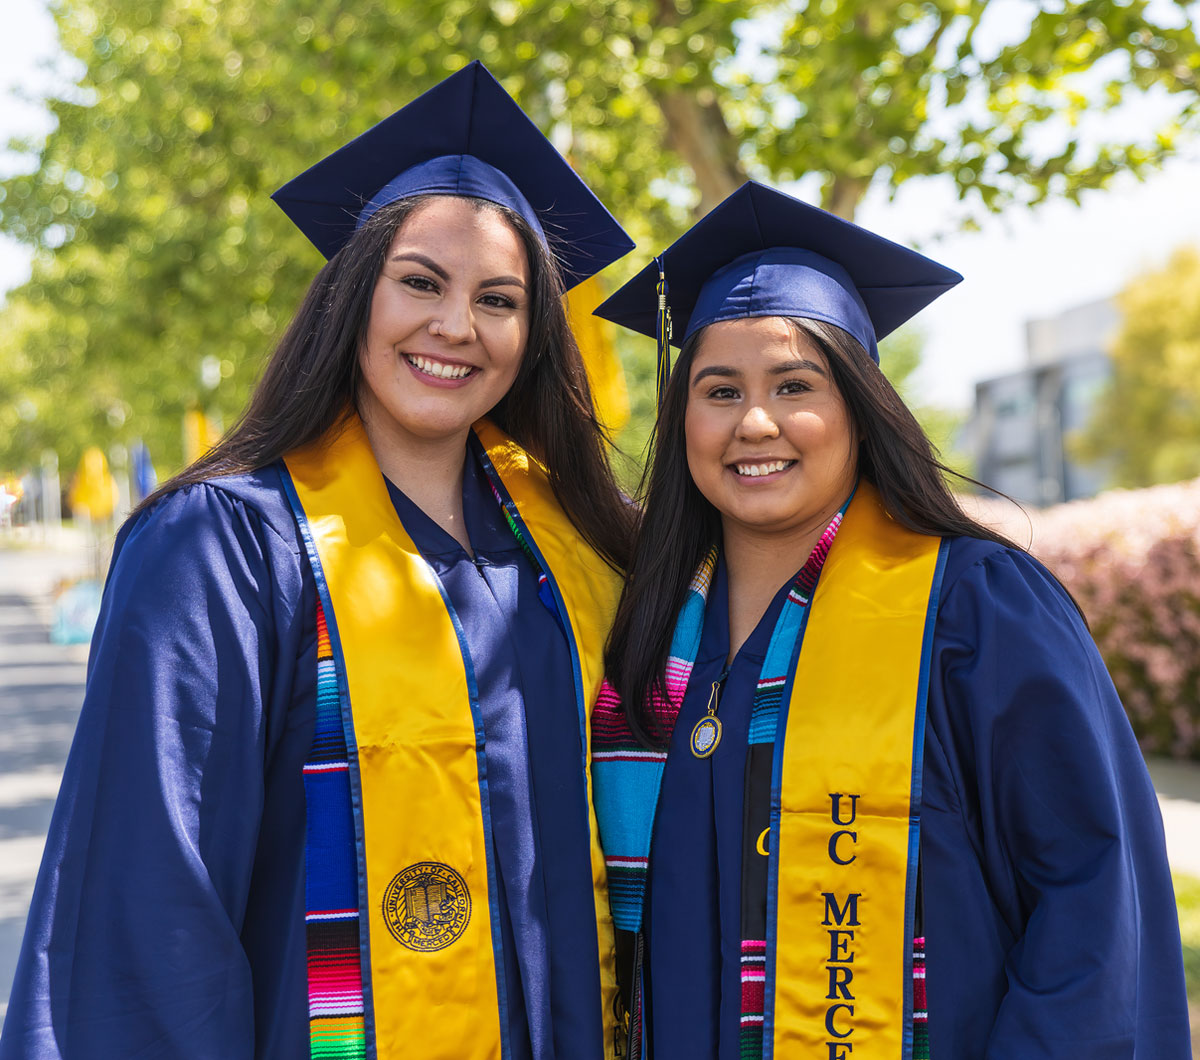 Calling all UC Merced alumni! Were you a Pell Grant recipient during your time at UC? We want to hear from you! 

Share how the Pell Grant impacted your college + post-college journey with the hashtag #PowerOfPell.